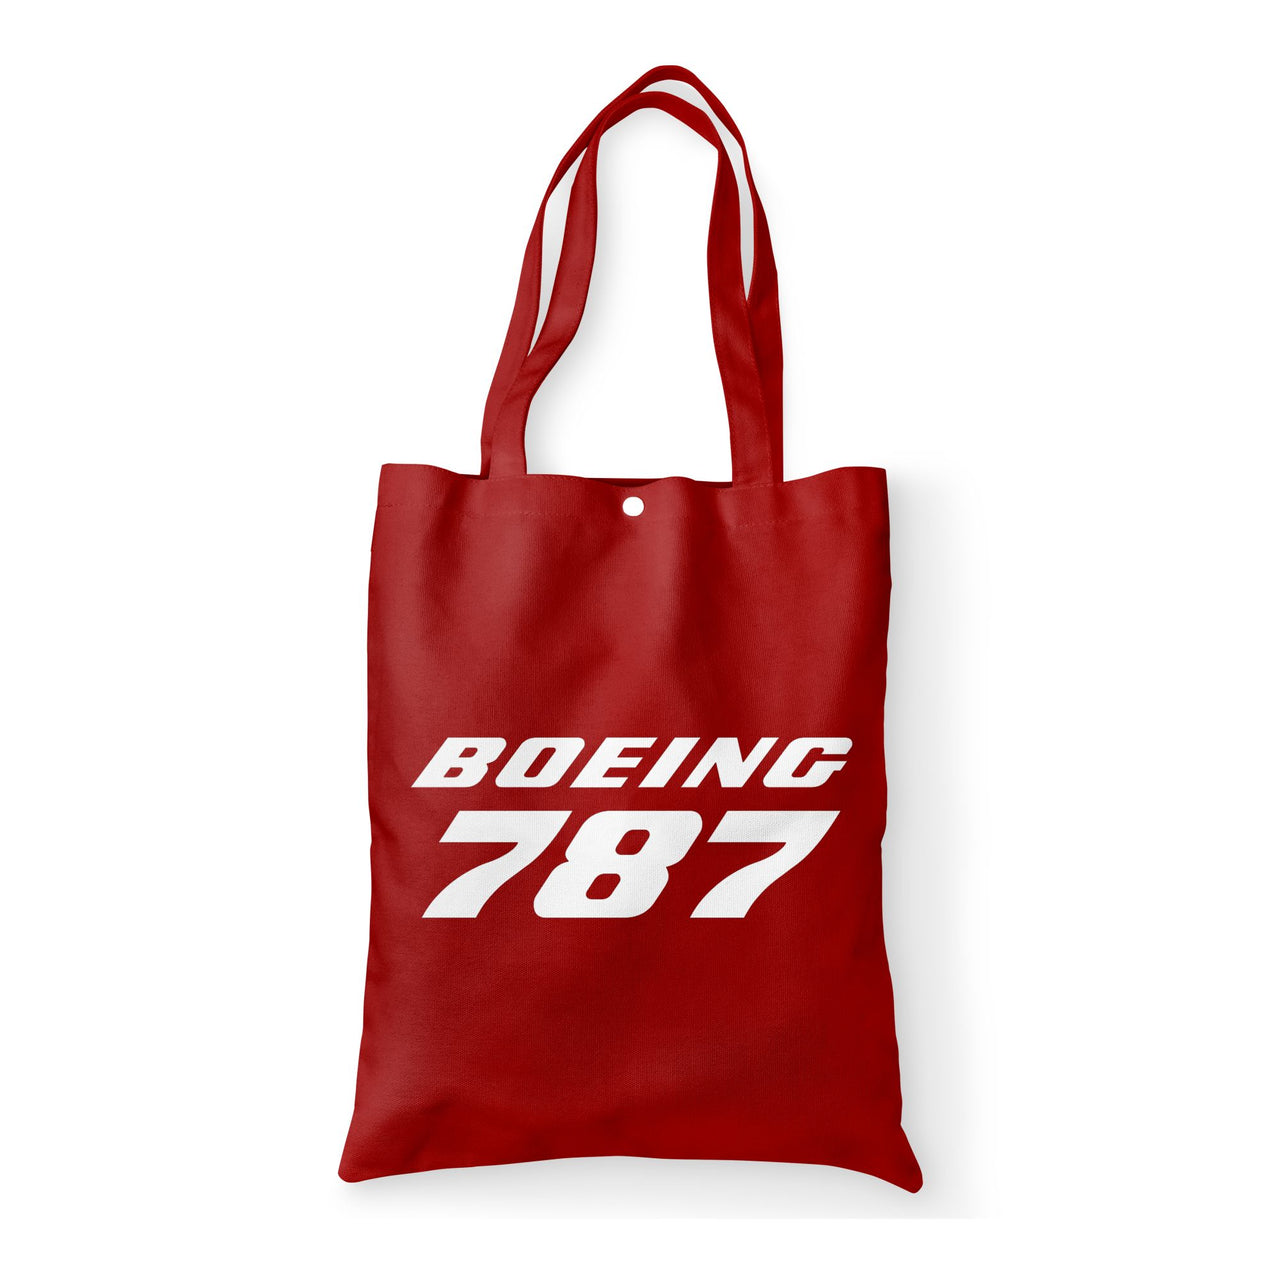 Boeing 787 & Text Designed Tote Bags